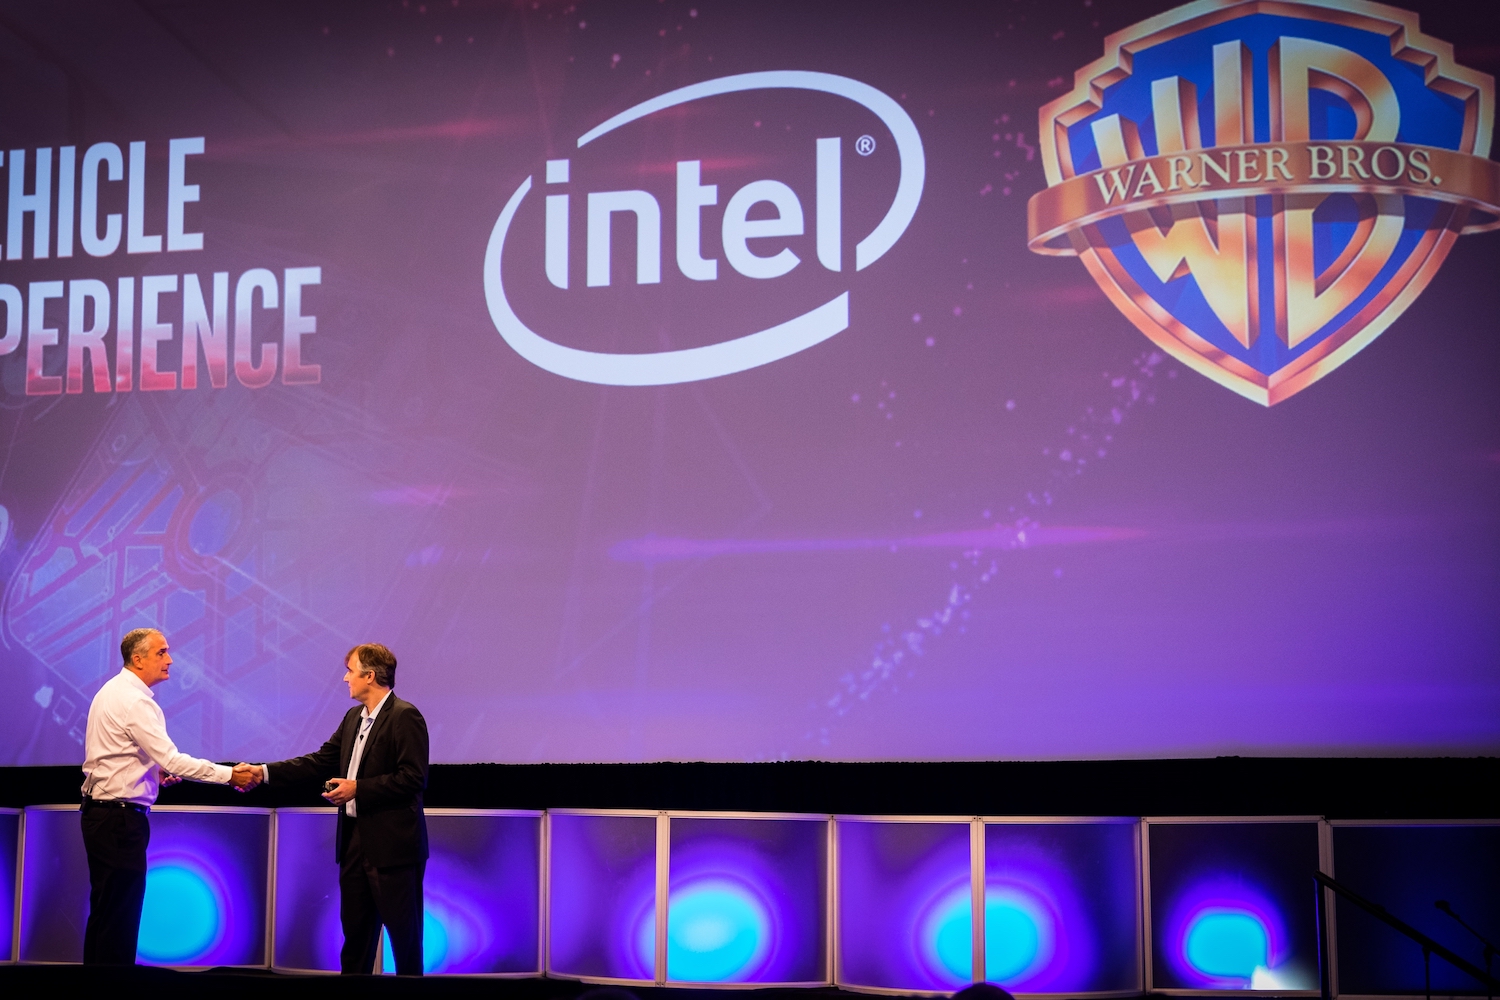 Intel Corporation CEO Brian Krzanich (left) and Thomas Gewecke, Warner Bros. chief digital officer and executive vice president, discuss the companies' plans to collaborate on in-cabin, immersive experiences in autonomous vehicles during Automobility LA on Wednesday, Nov. 29, 2017, in Los Angeles. (Credit: Intel Corporation)